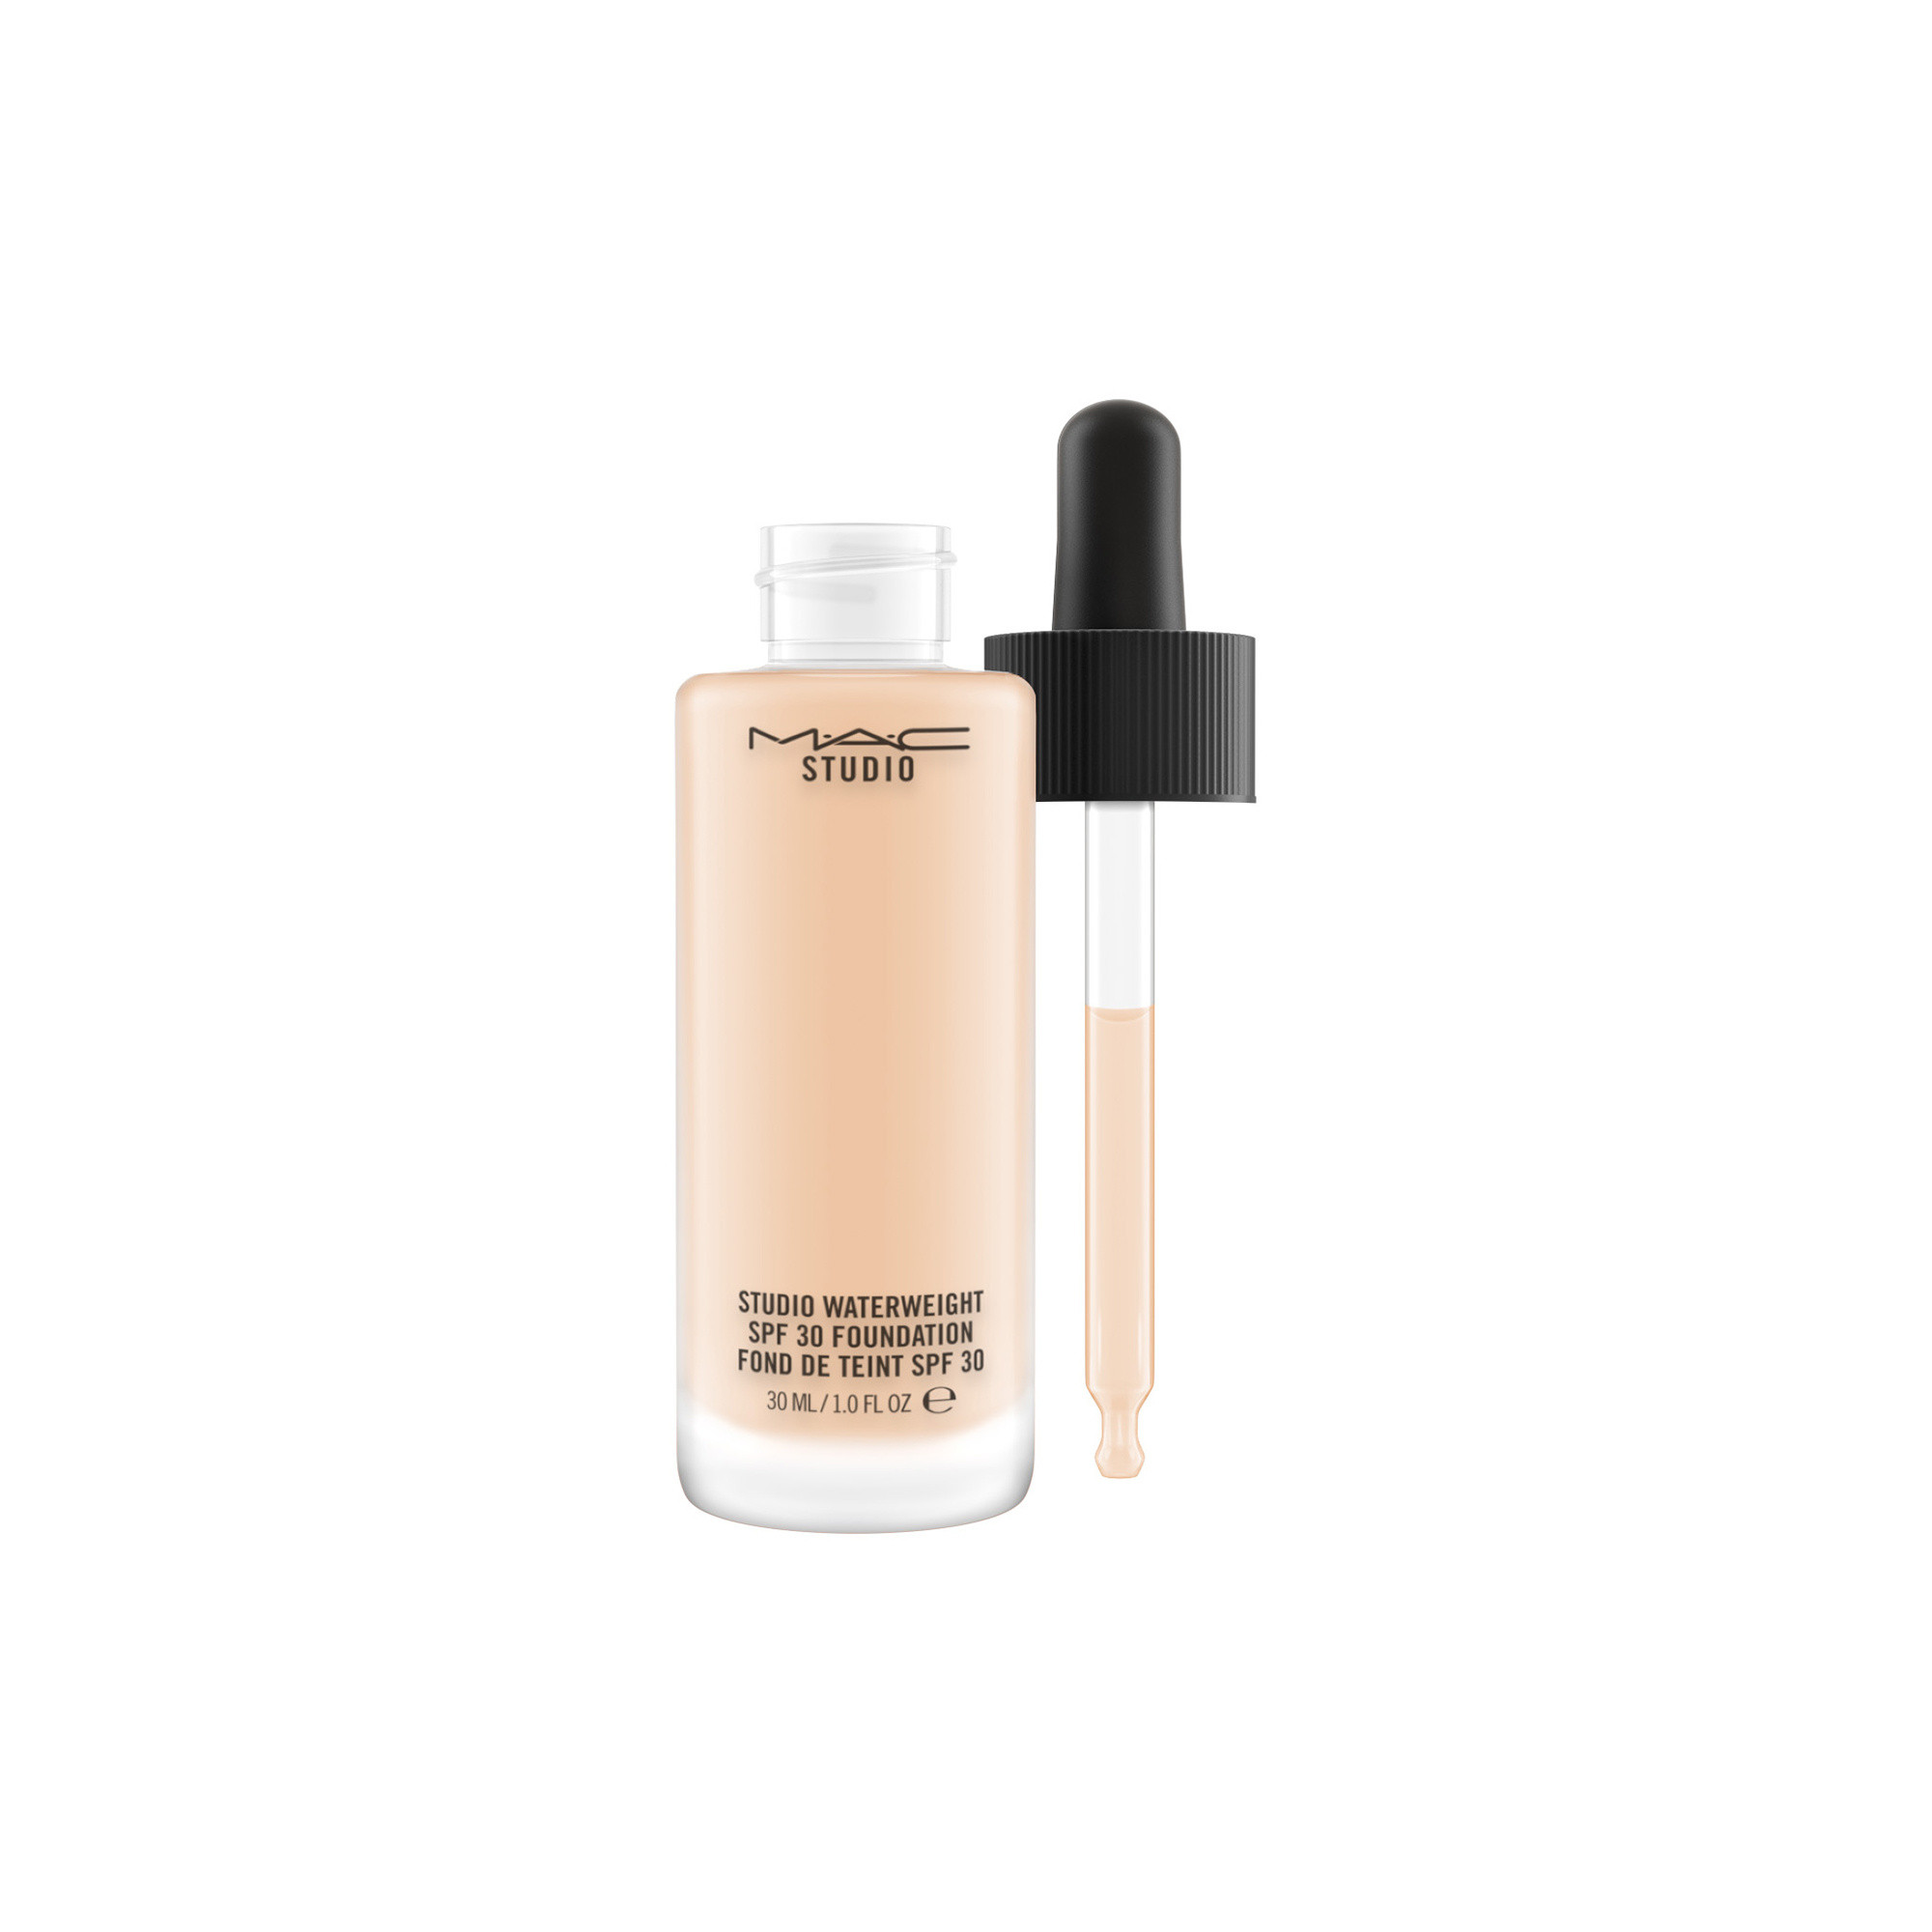 Studio Waterweight Foundation Spf30 - NC15, NC15, large image number 0